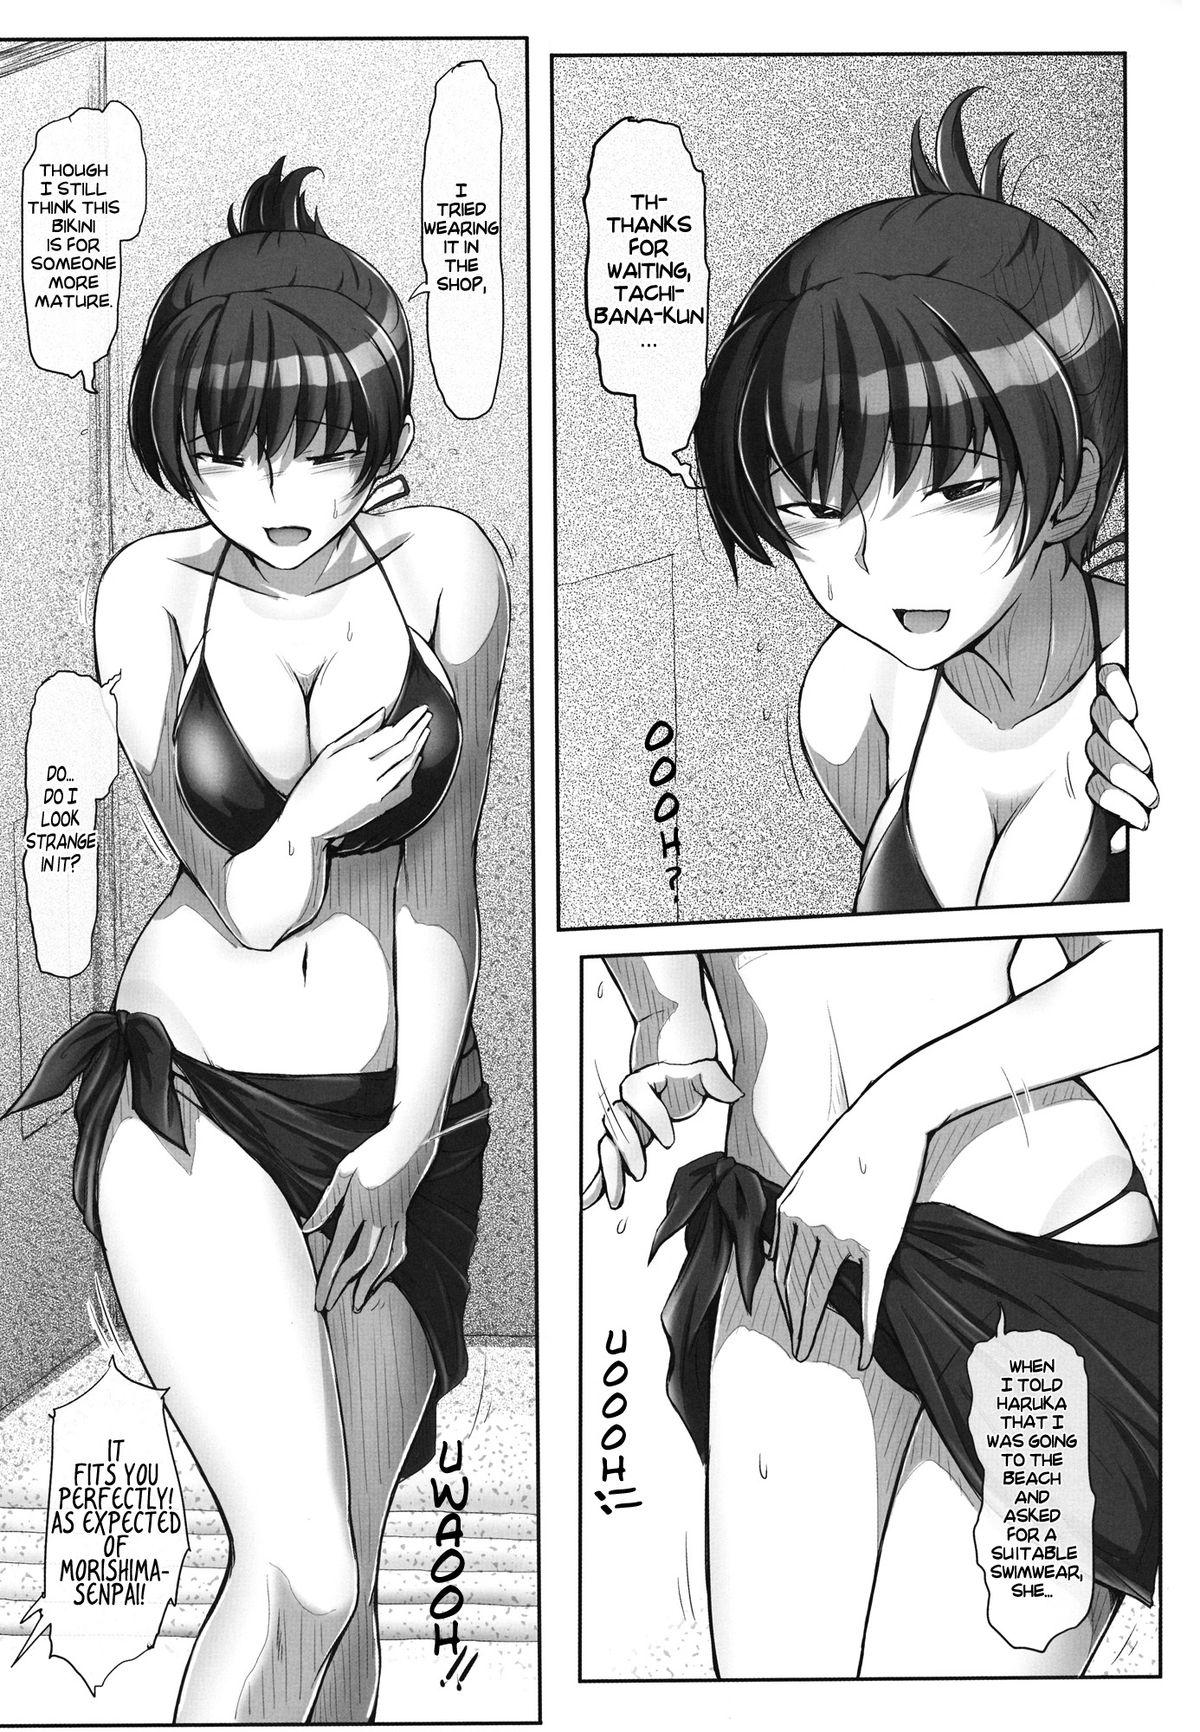 Euro Porn X ON THE BEACH - Amagami White Chick - Page 2